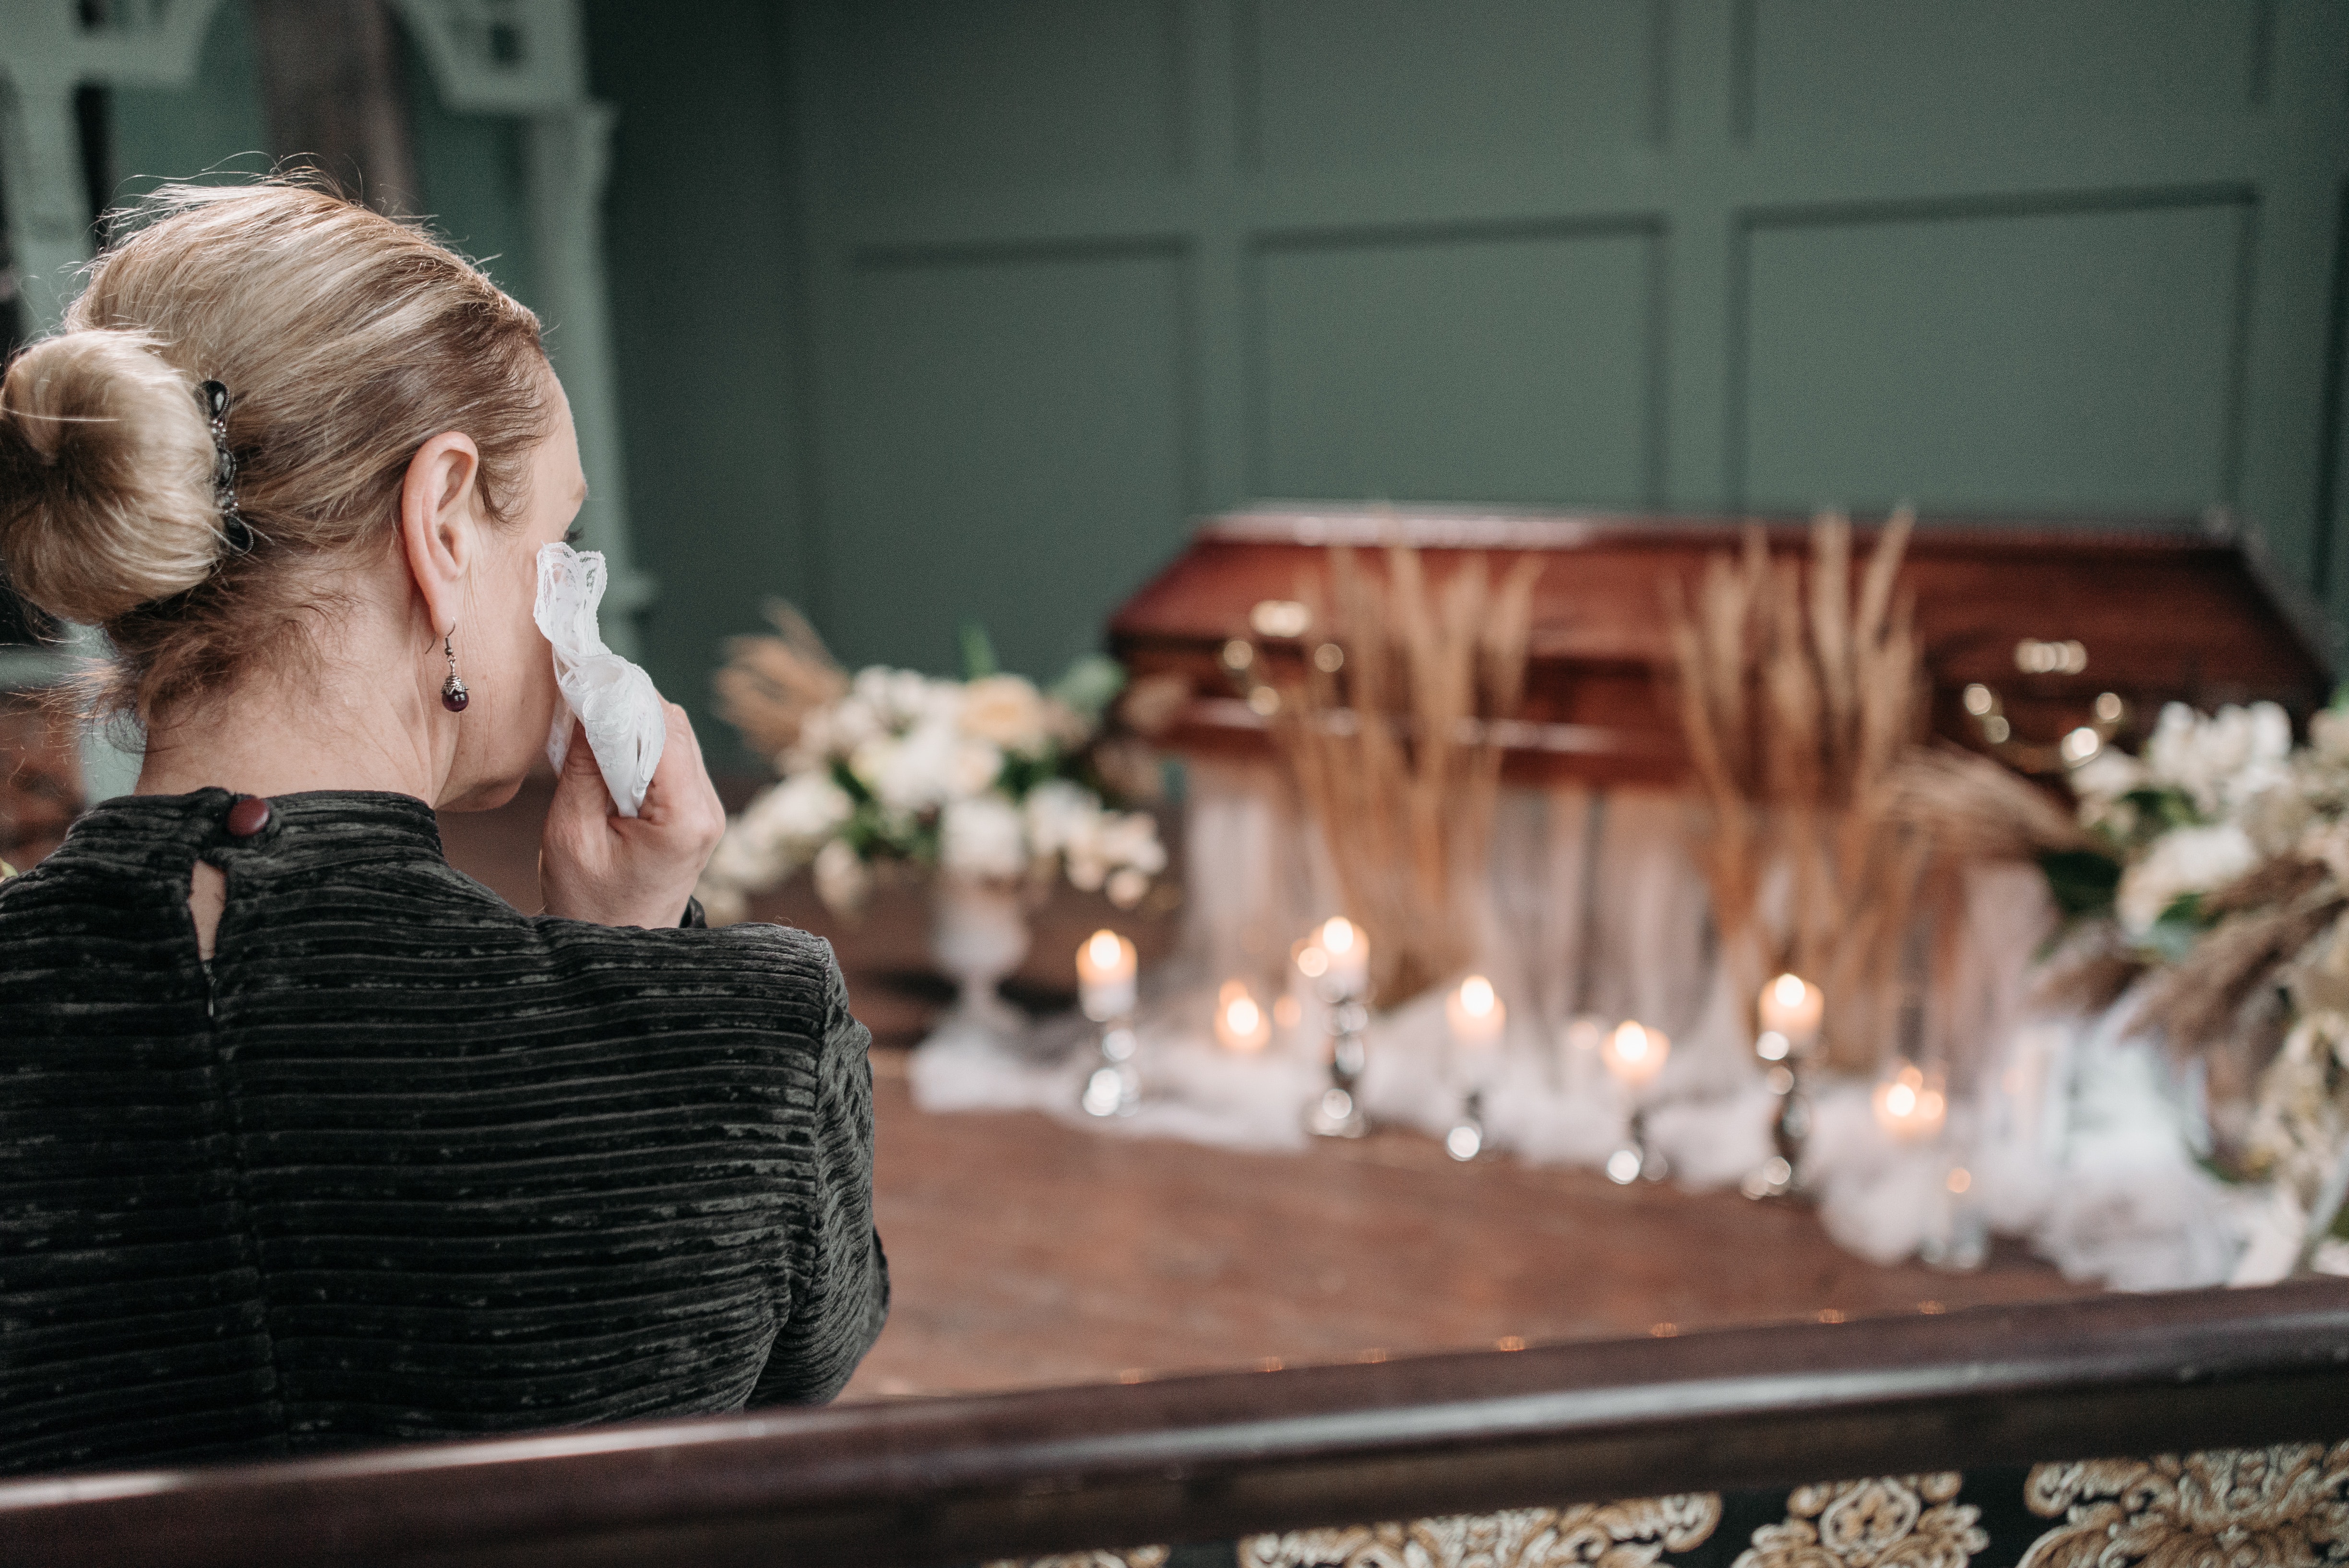 The woman was mourning the loss of her mother. | Source: Pexels